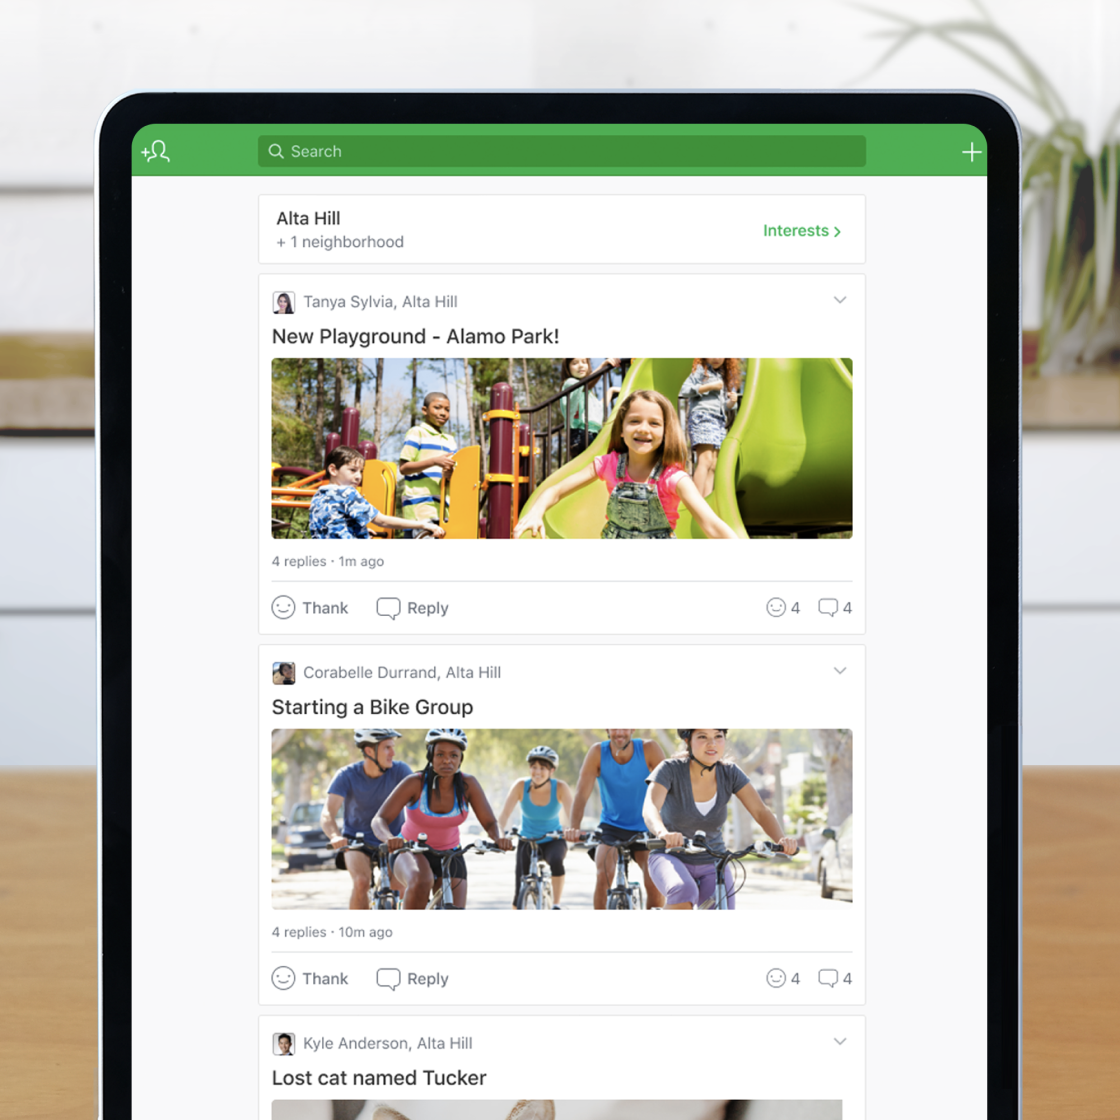 An image of an iPad showcasing the home feed of the Nextdoor app. The app shows posts of people enjoying a park and riding bikes as a group.